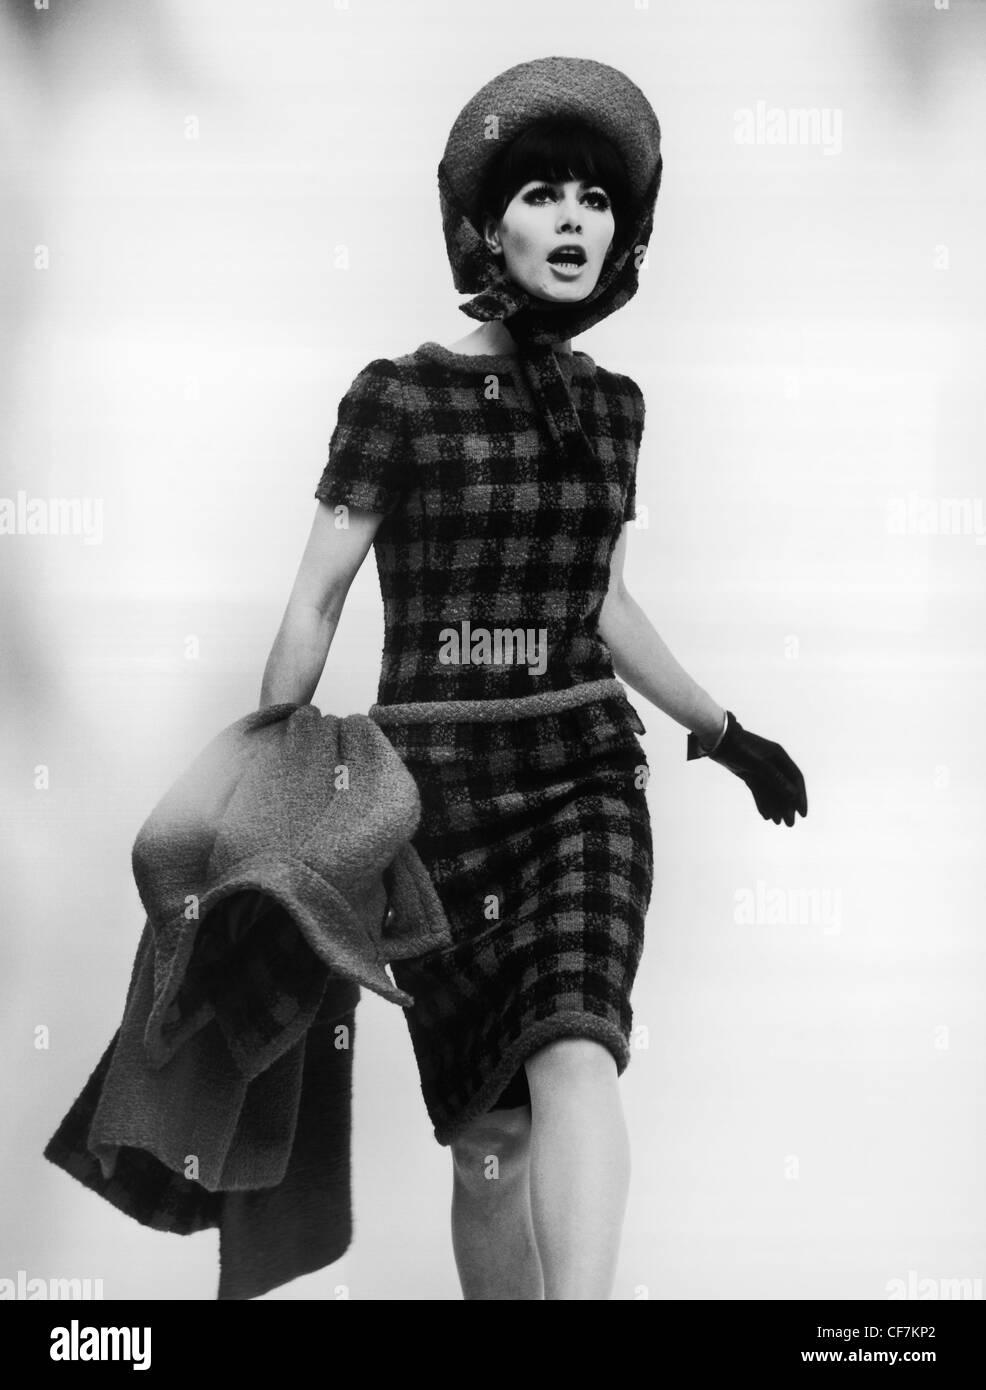 German Winter Fashions Female wearing checkerboard skirt suit, with hat, leather gloves, carrying tweed coat Gisela Them Stock Photo